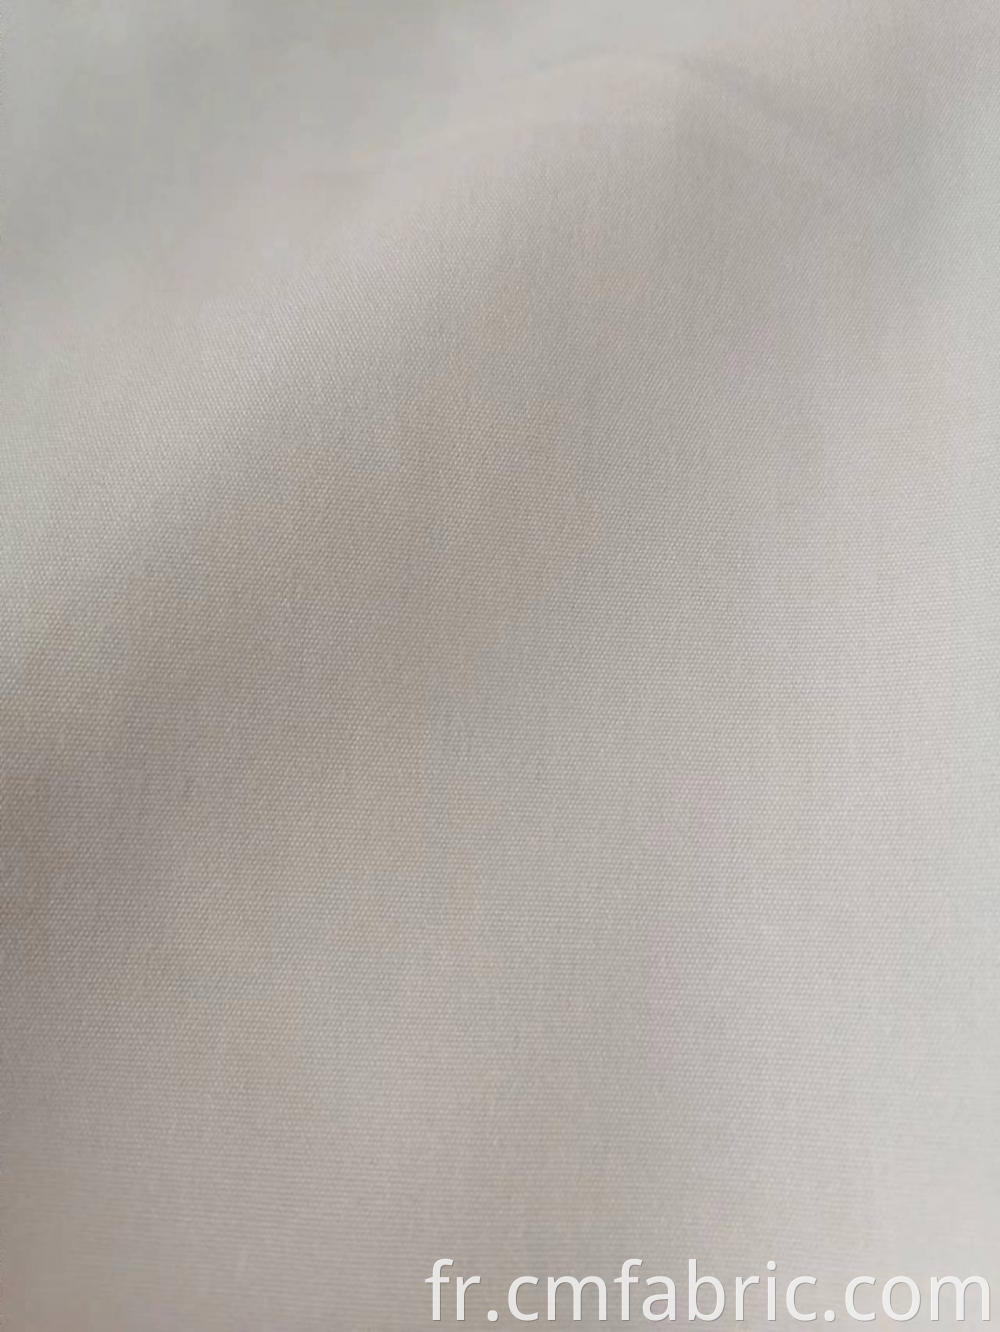 80s Double Cotton High End Poplin White Color For Shirt 2 Jpg